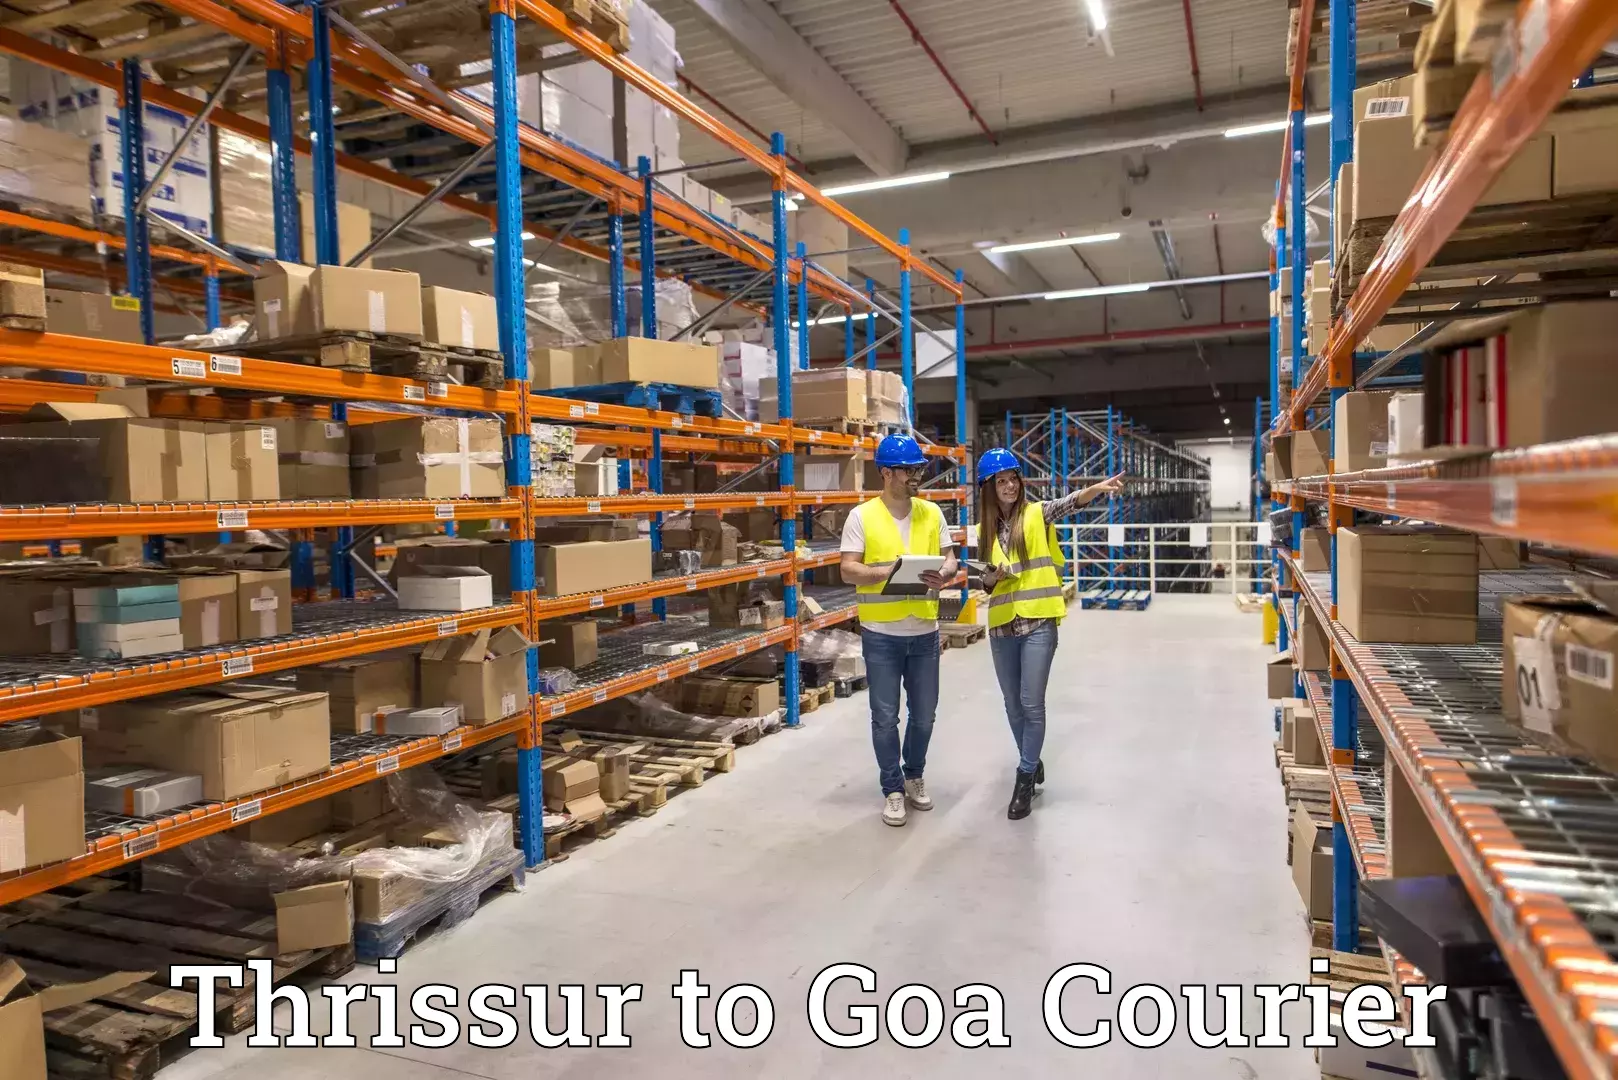 Reliable logistics providers Thrissur to Goa